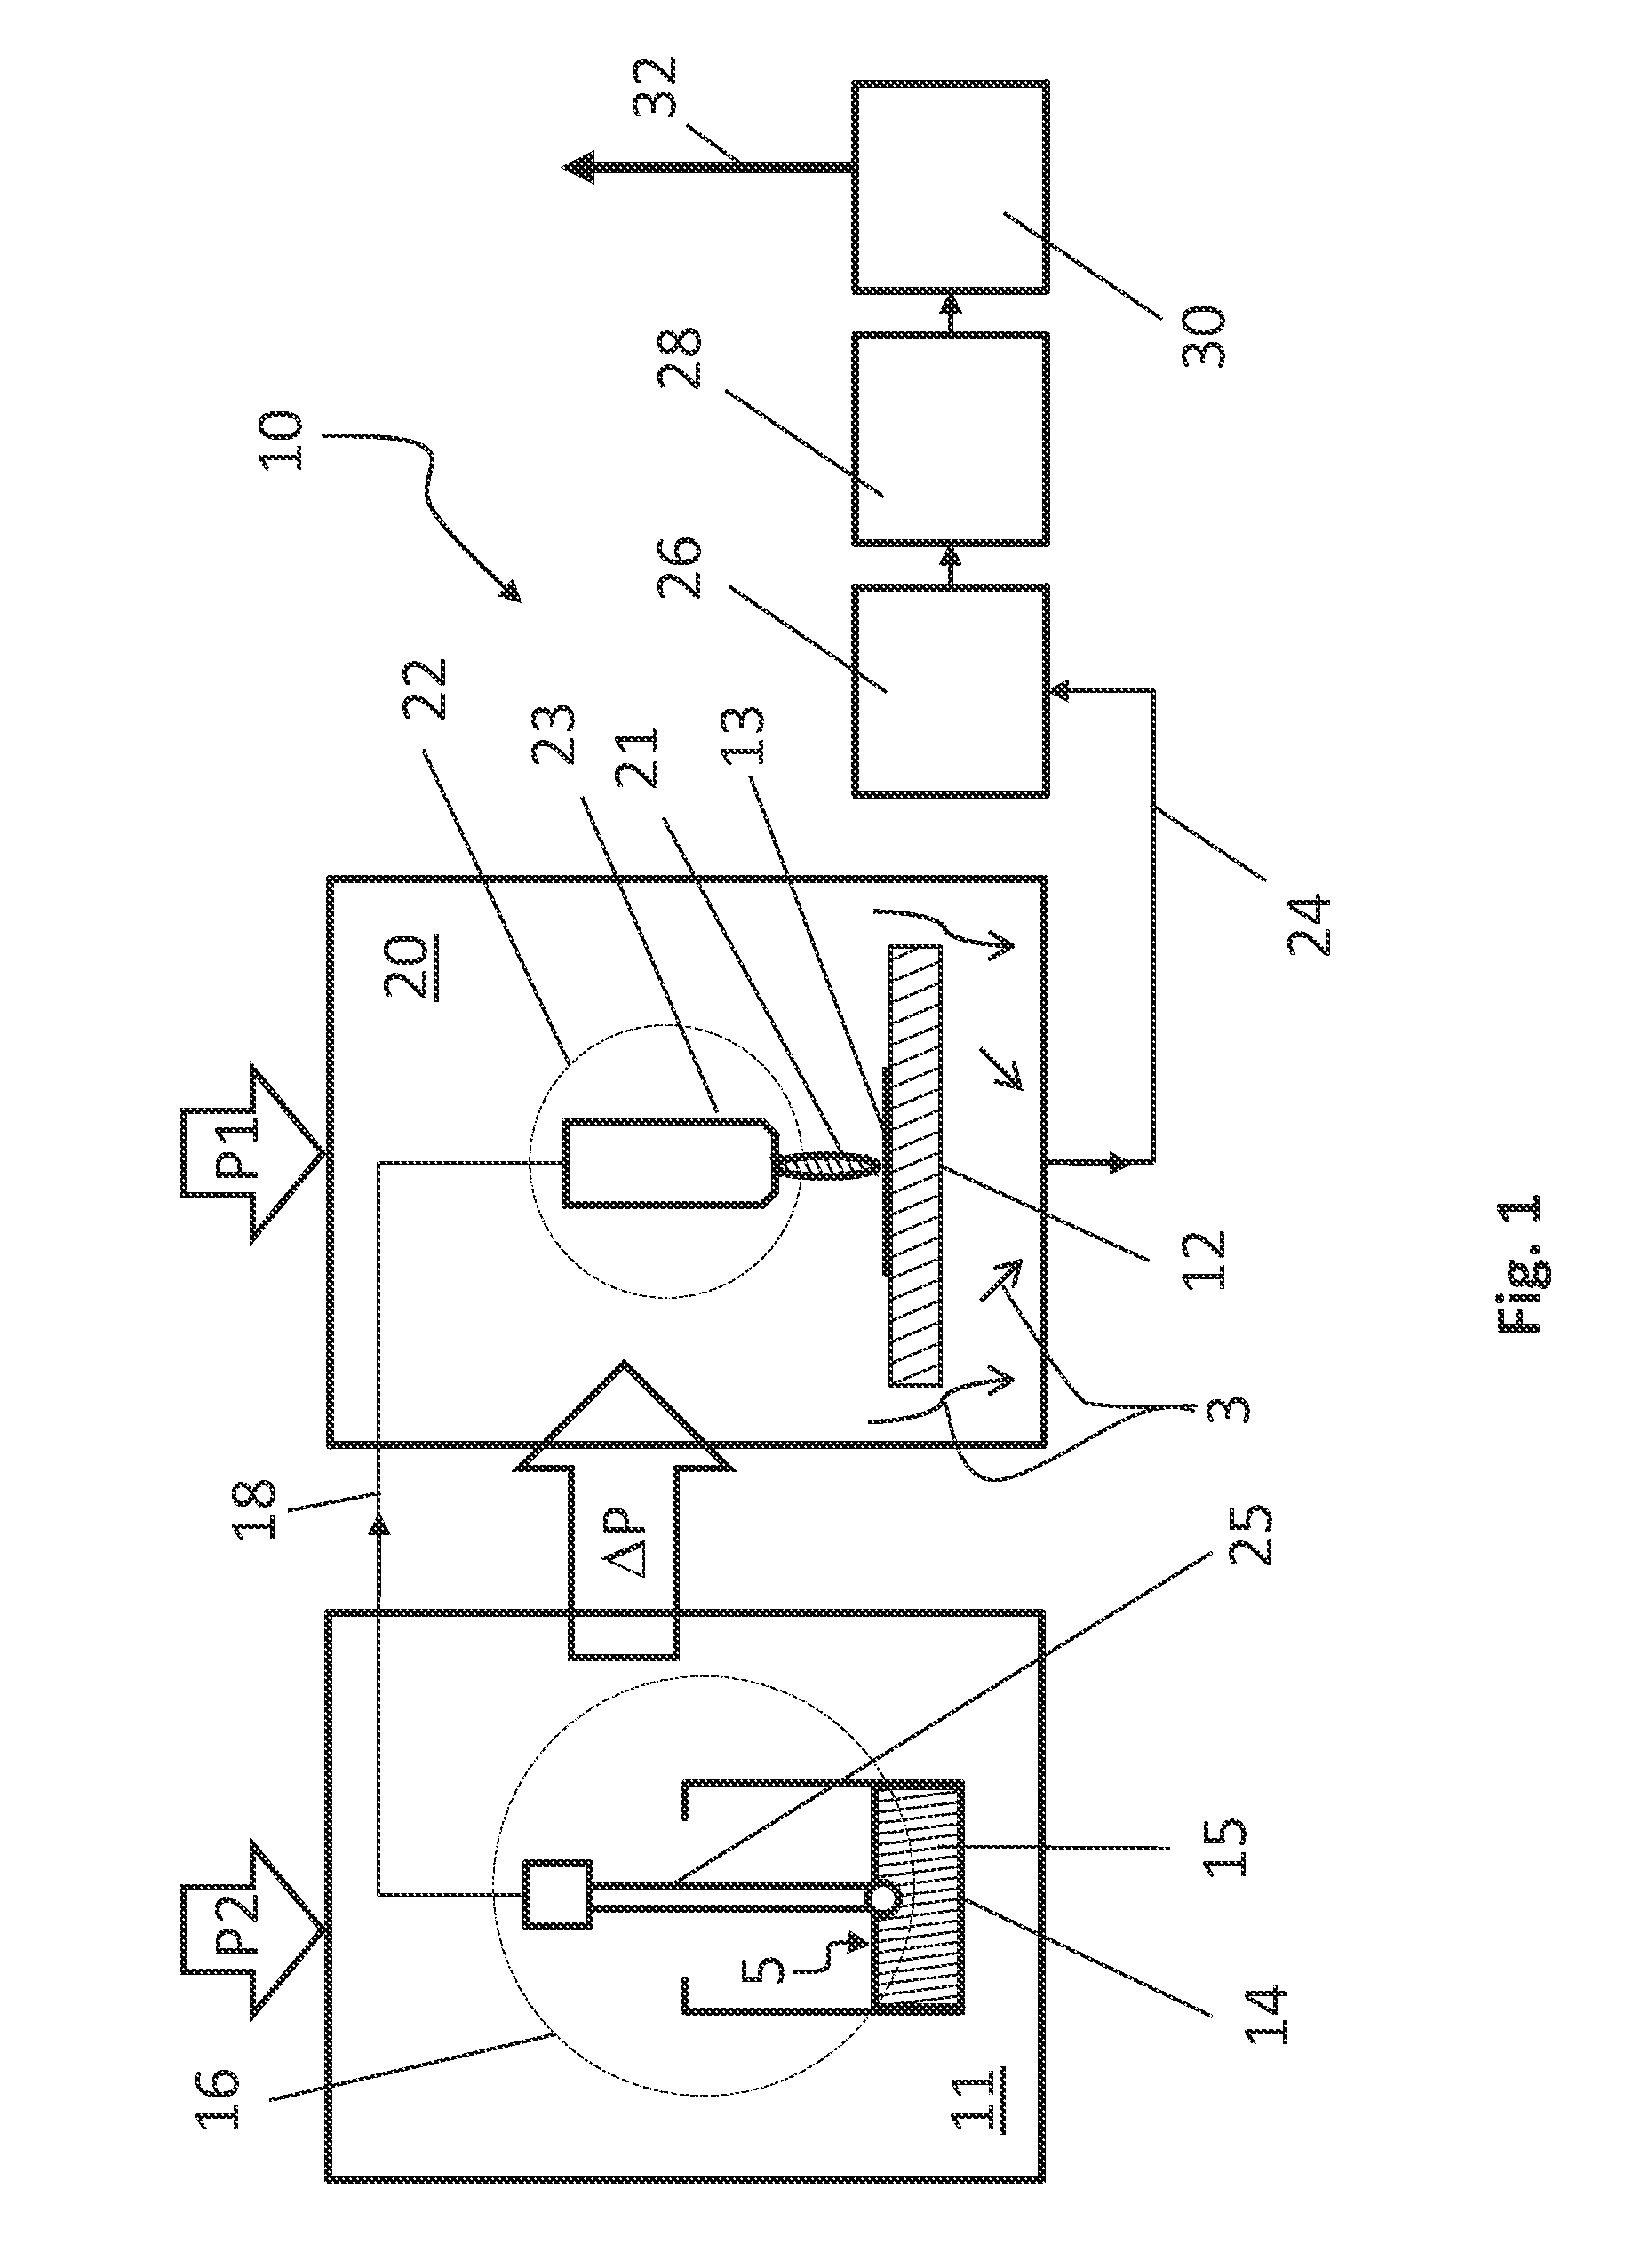 Plasma coating device and method for plasma coating of a substrate